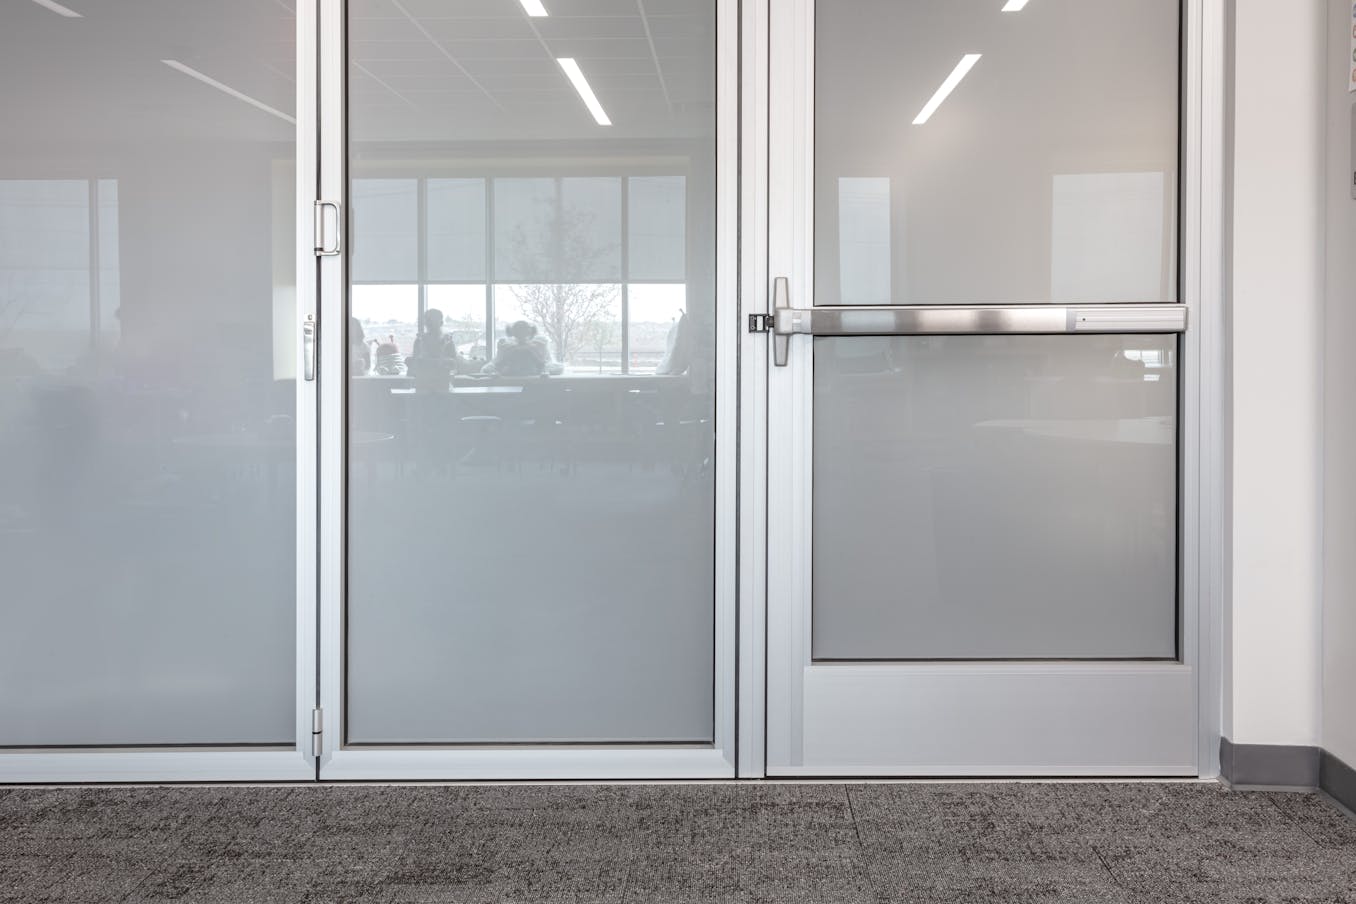 A classroom featuring frosted glass doors and panic hardware